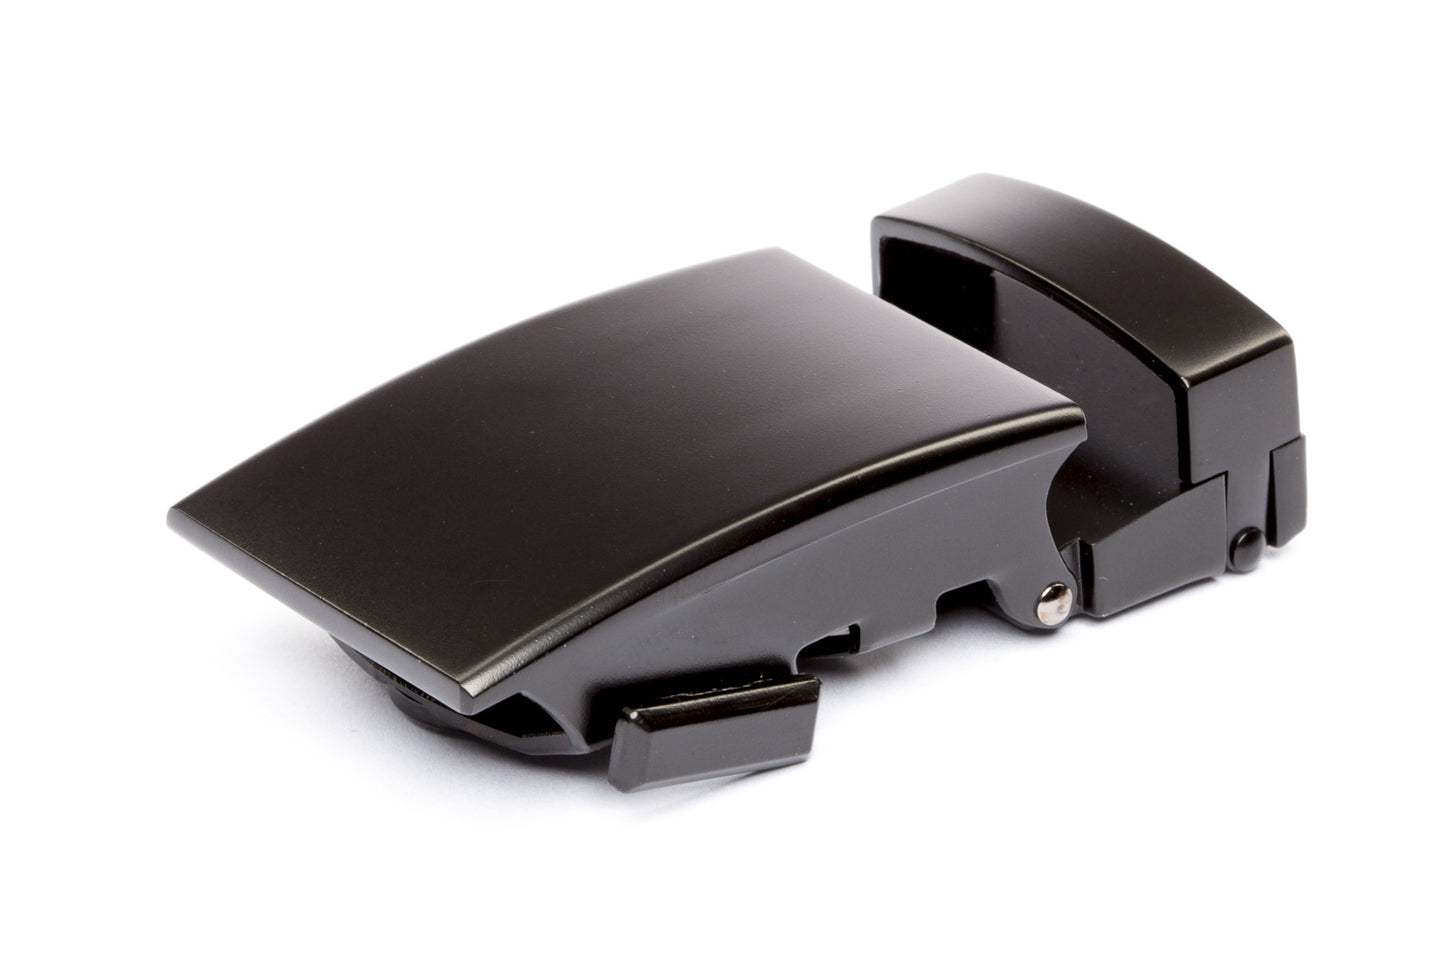 Men's classic ratchet belt buckle in black with a 1.25-inch width.